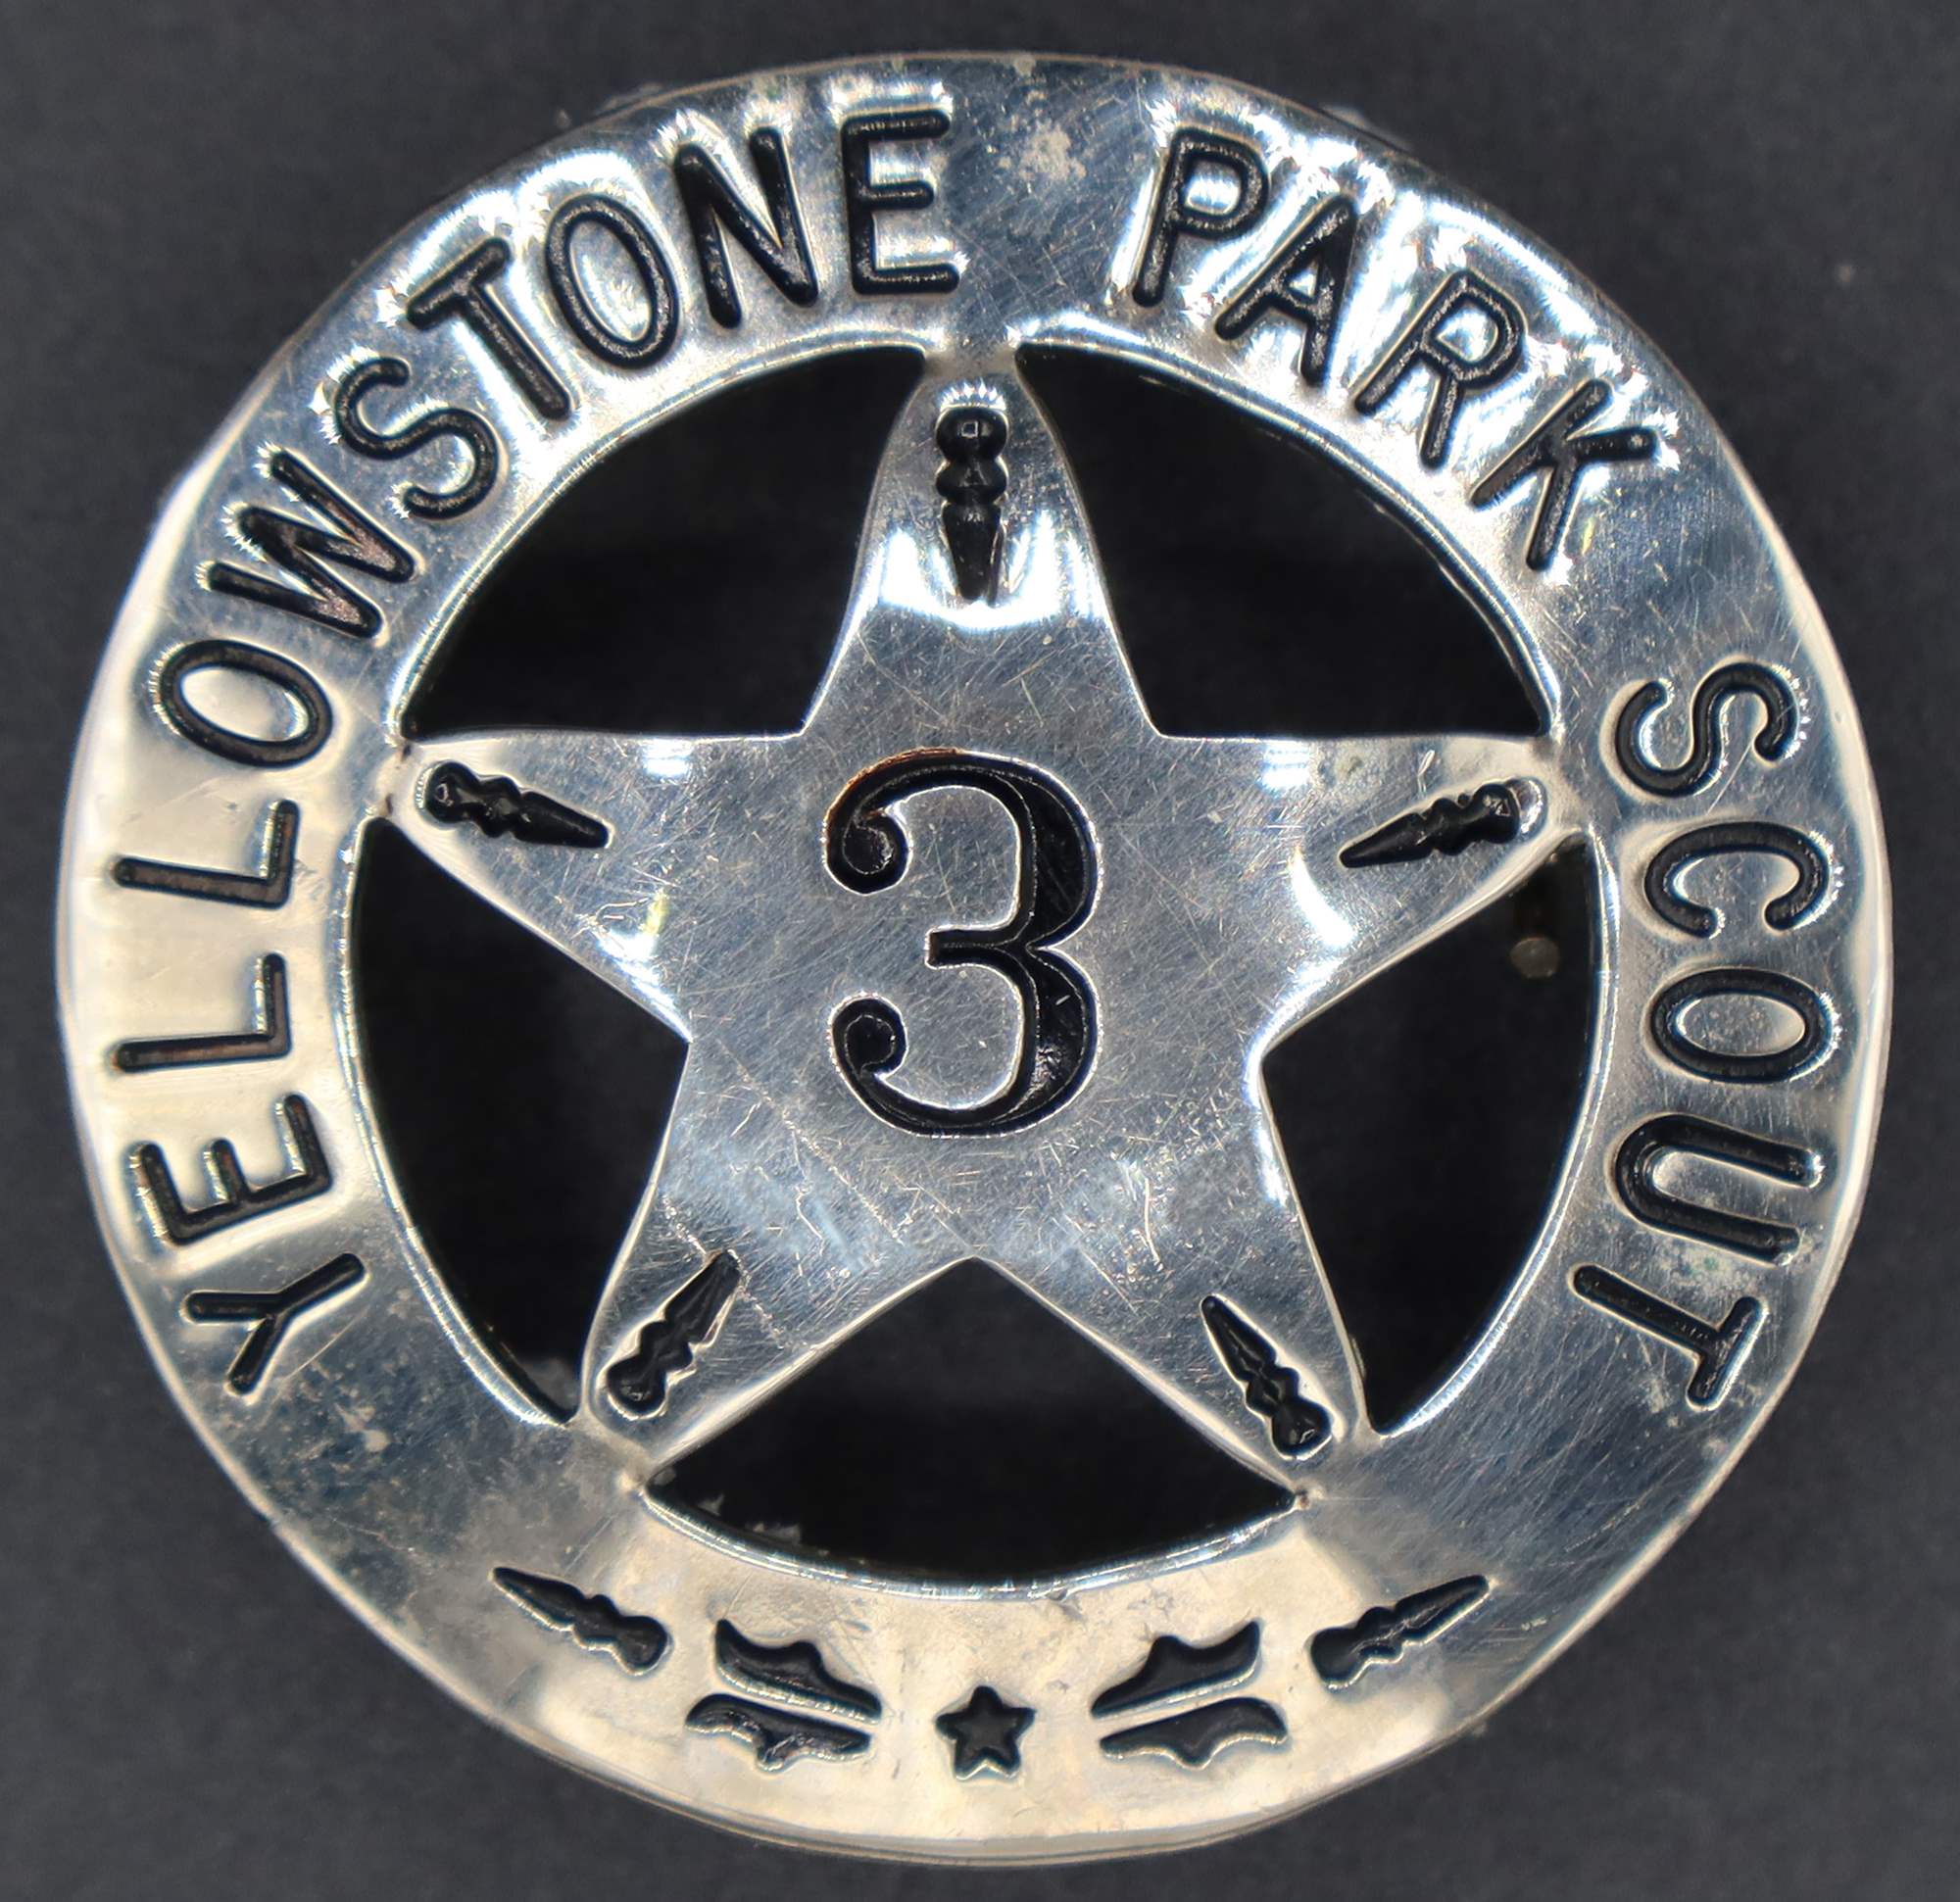 Nickel-plated metal Yellowstone Park Scout Badge